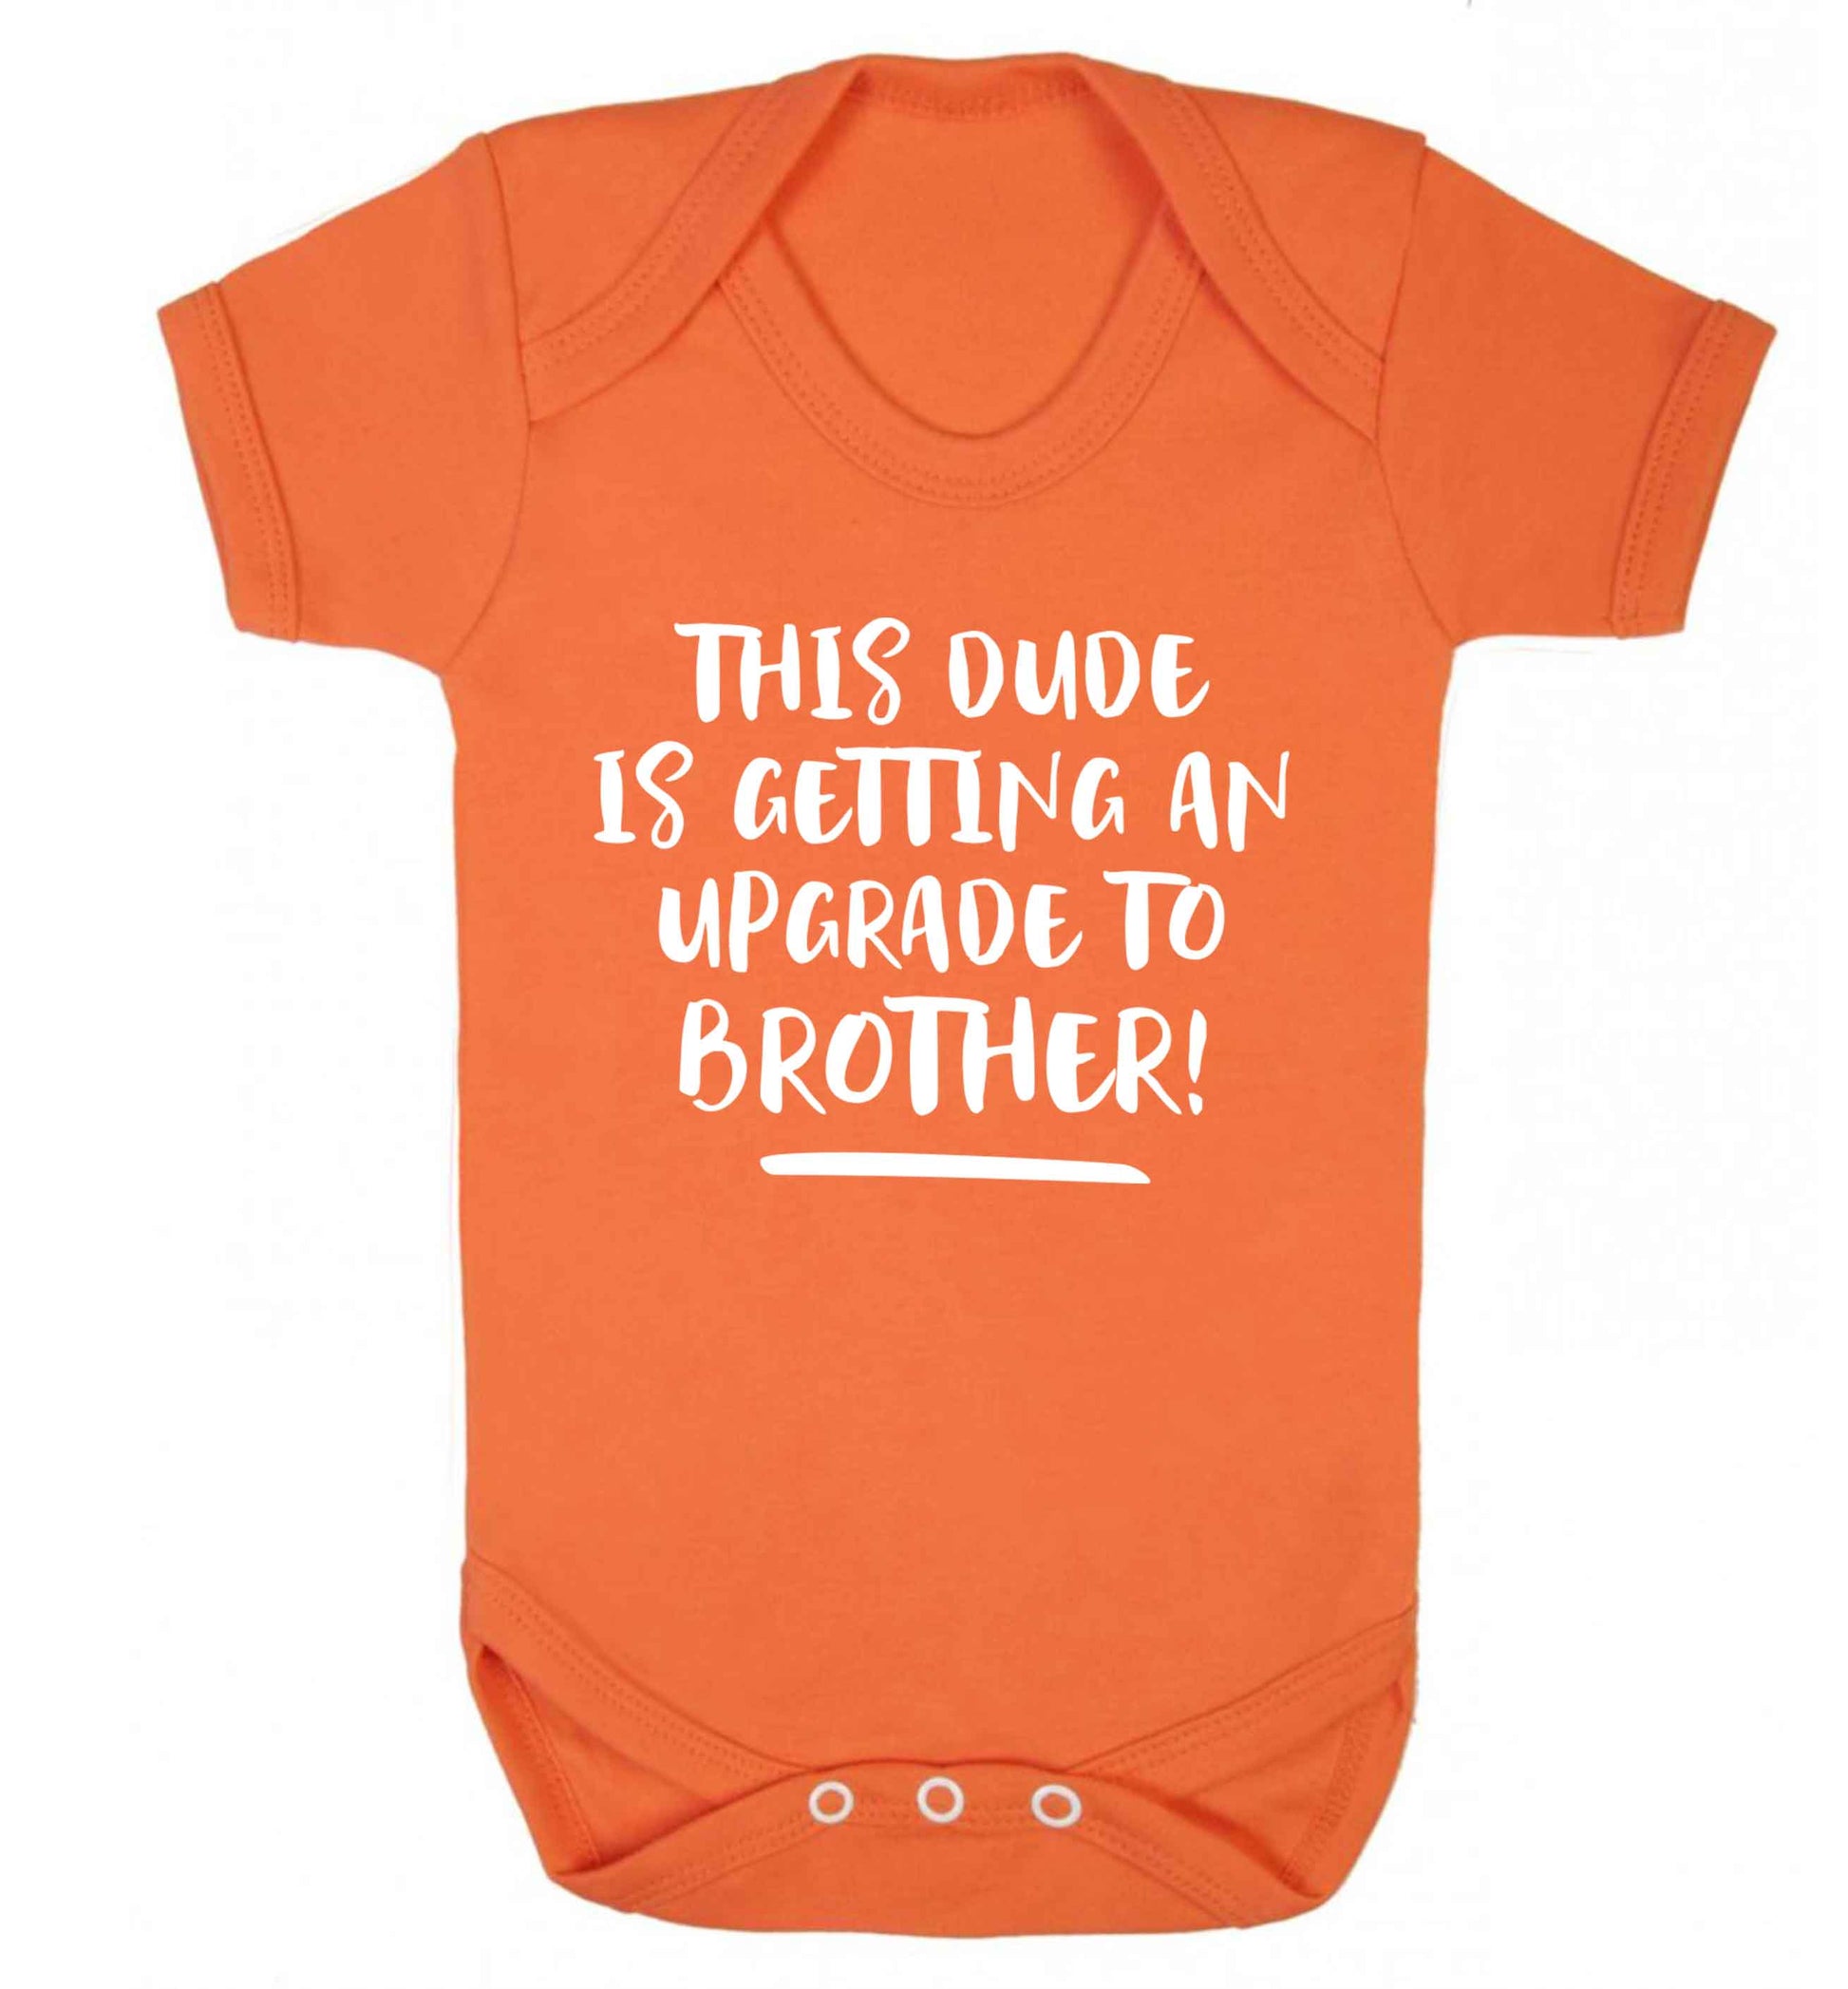 This dude is getting an upgrade to brother! Baby Vest orange 18-24 months